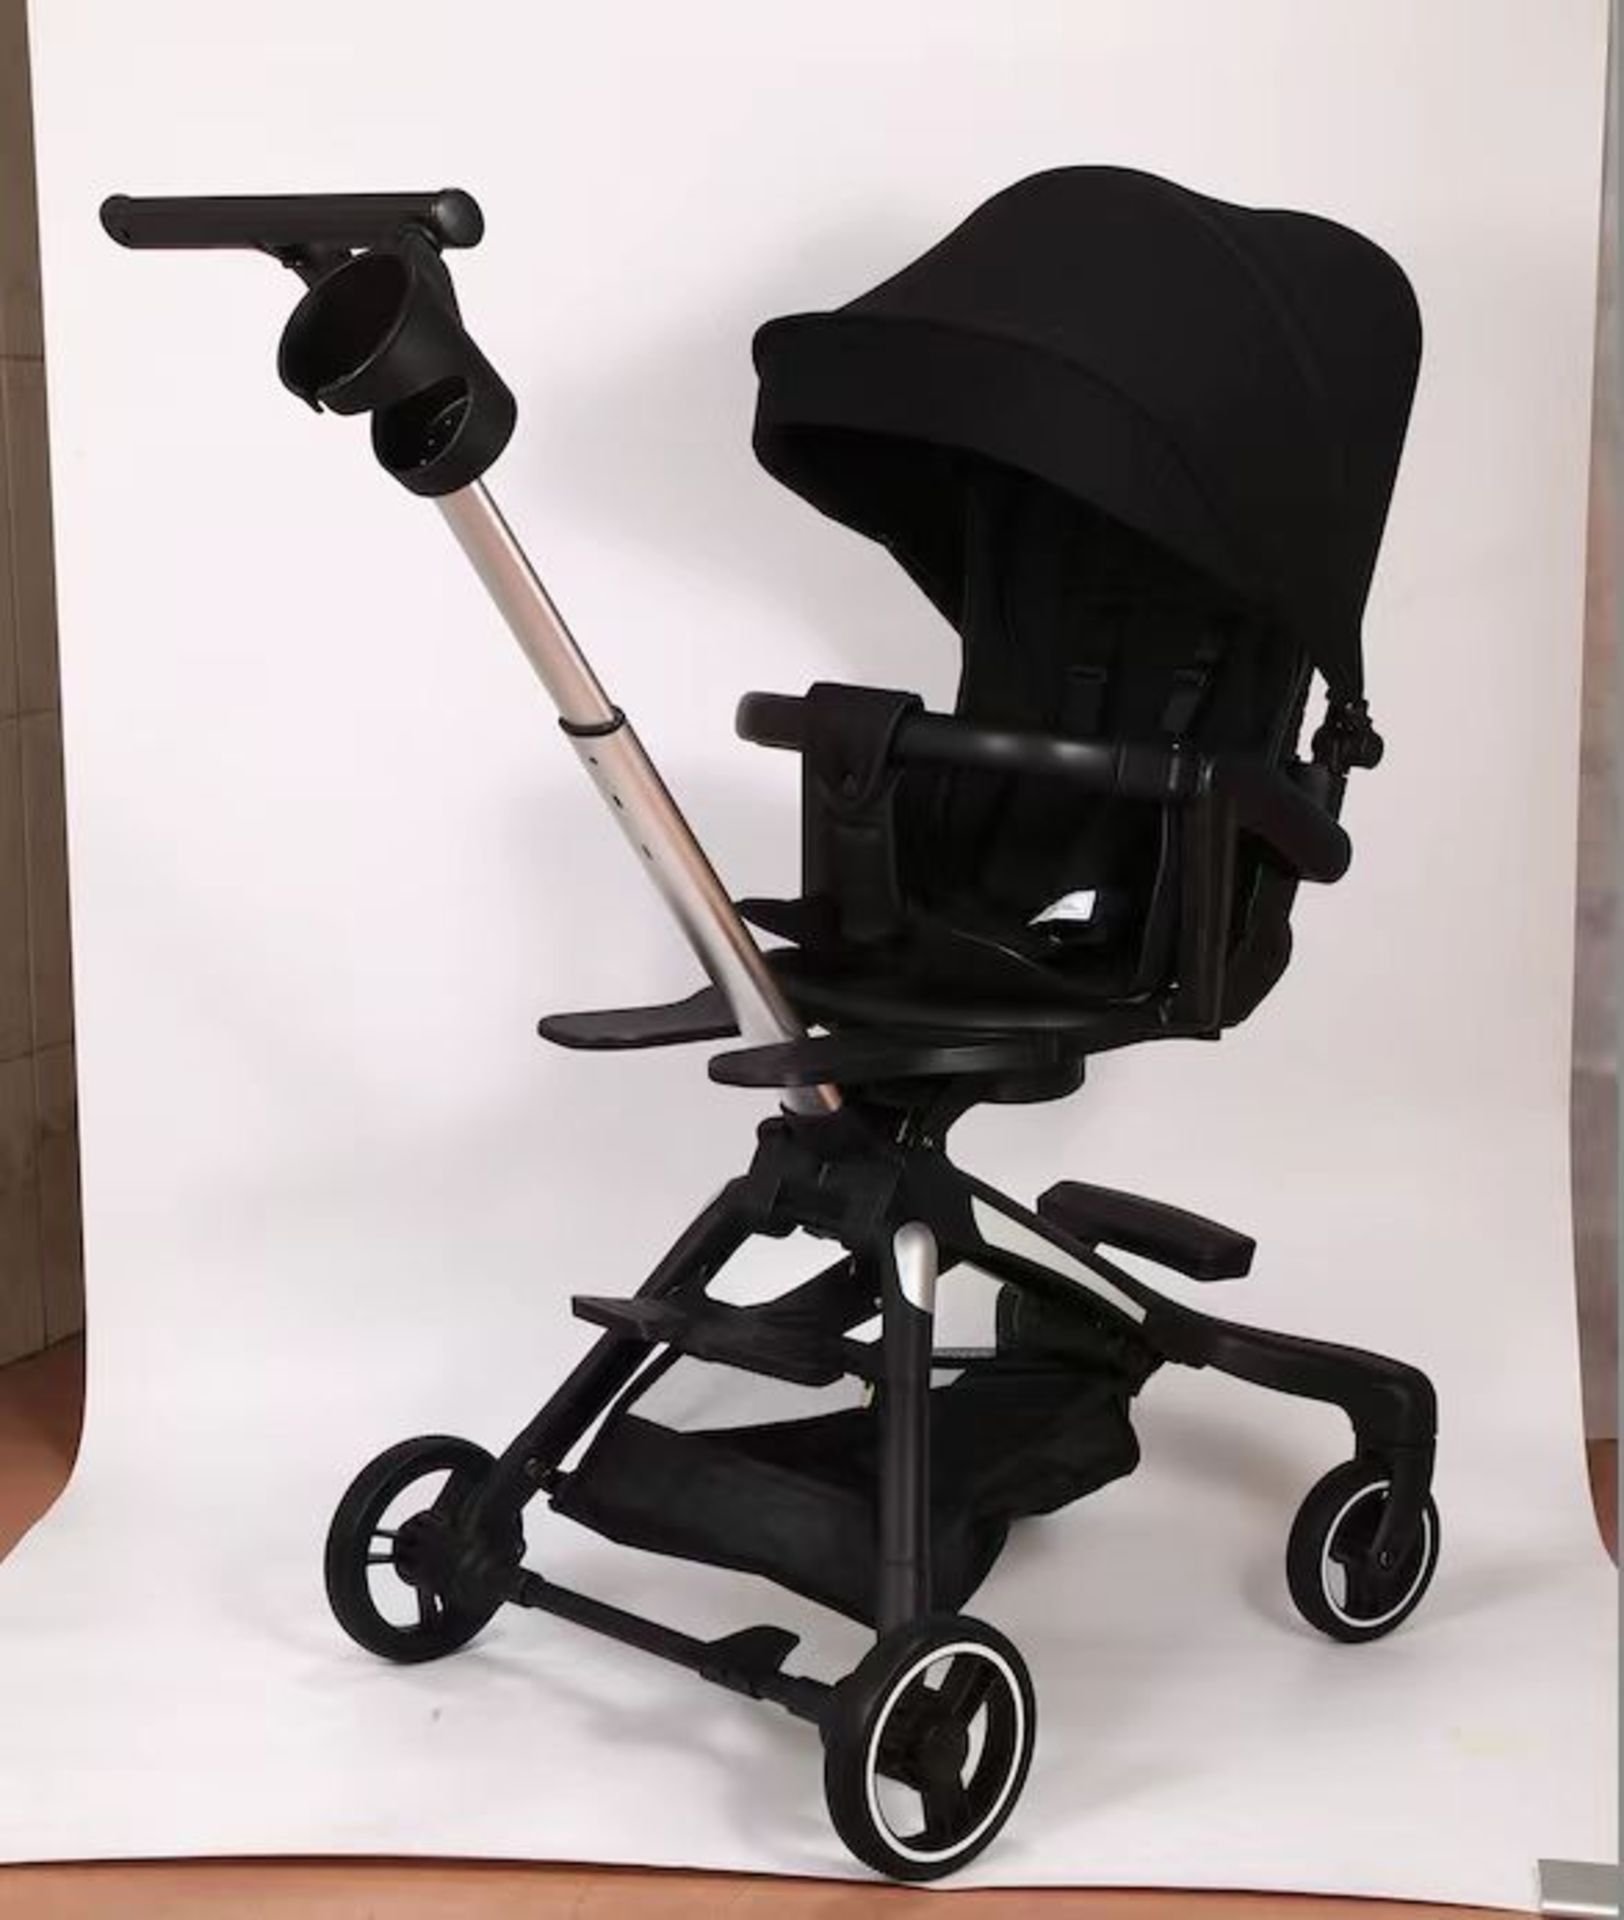 LOT CONTAINING 20 WHEELIVE STROLLERS 2IN1 BRAND NEW RRP £119.00 EACH - Image 2 of 2